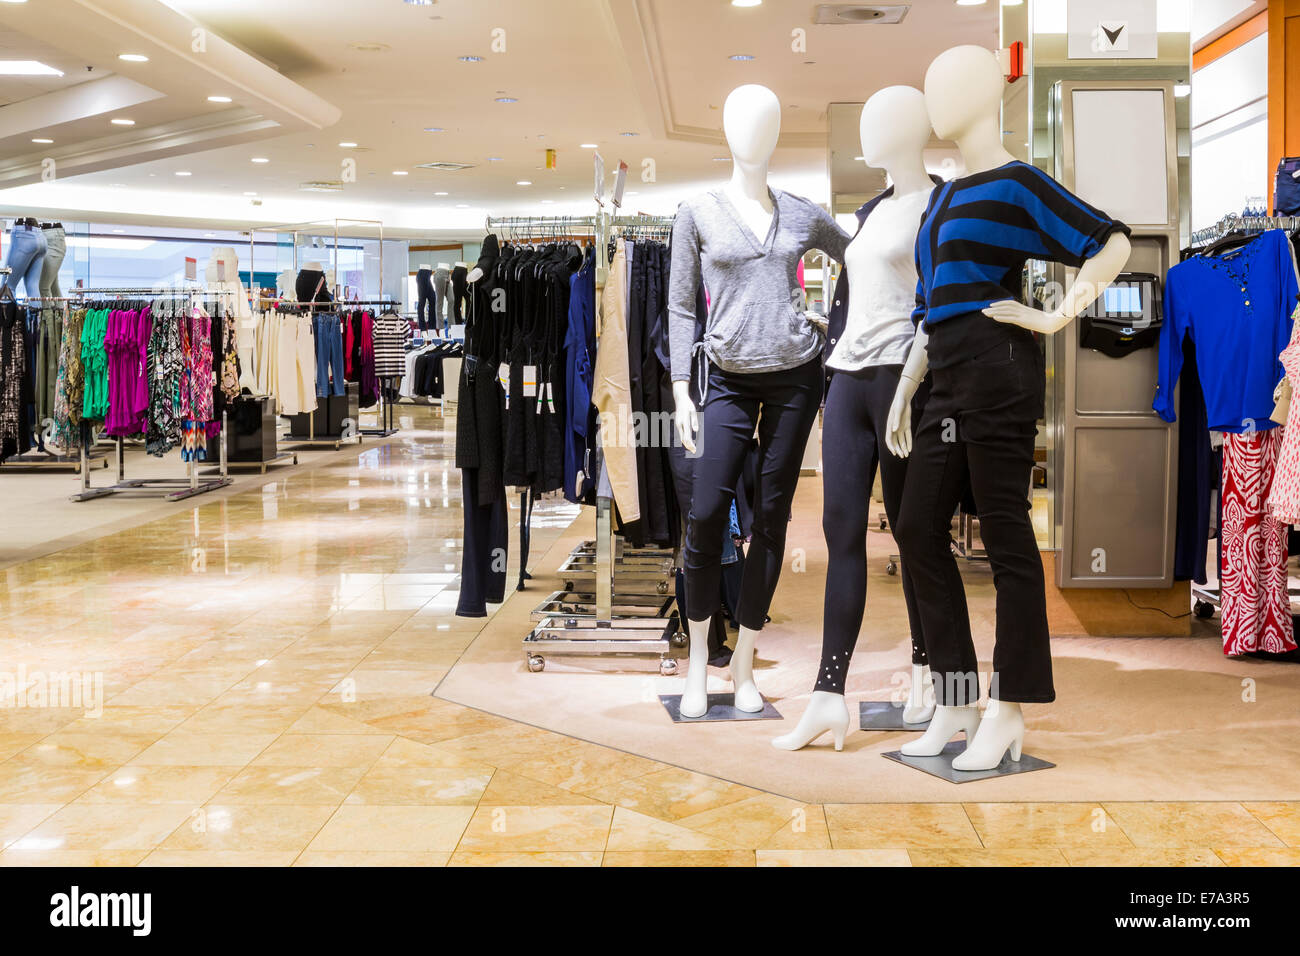 Interior of a fashion and designer clothing store. Stock Photo